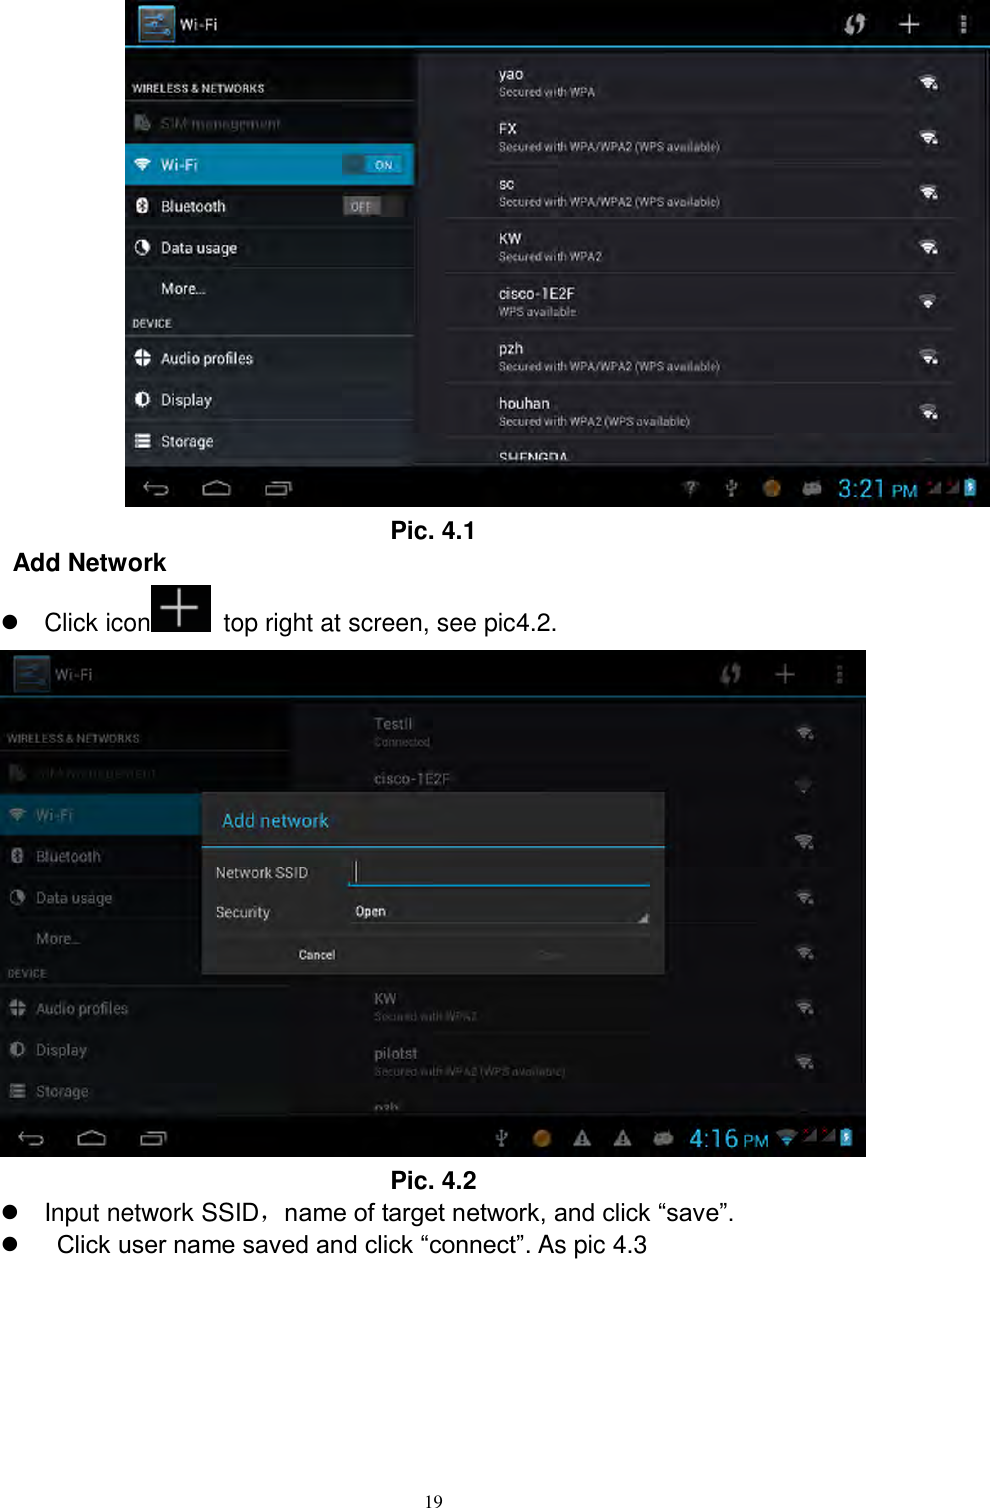      19  Pic. 4.1 Add Network   Click icon   top right at screen, see pic4.2.  Pic. 4.2  Input network SSID，name of target network, and click “save”.     Click user name saved and click “connect”. As pic 4.3 